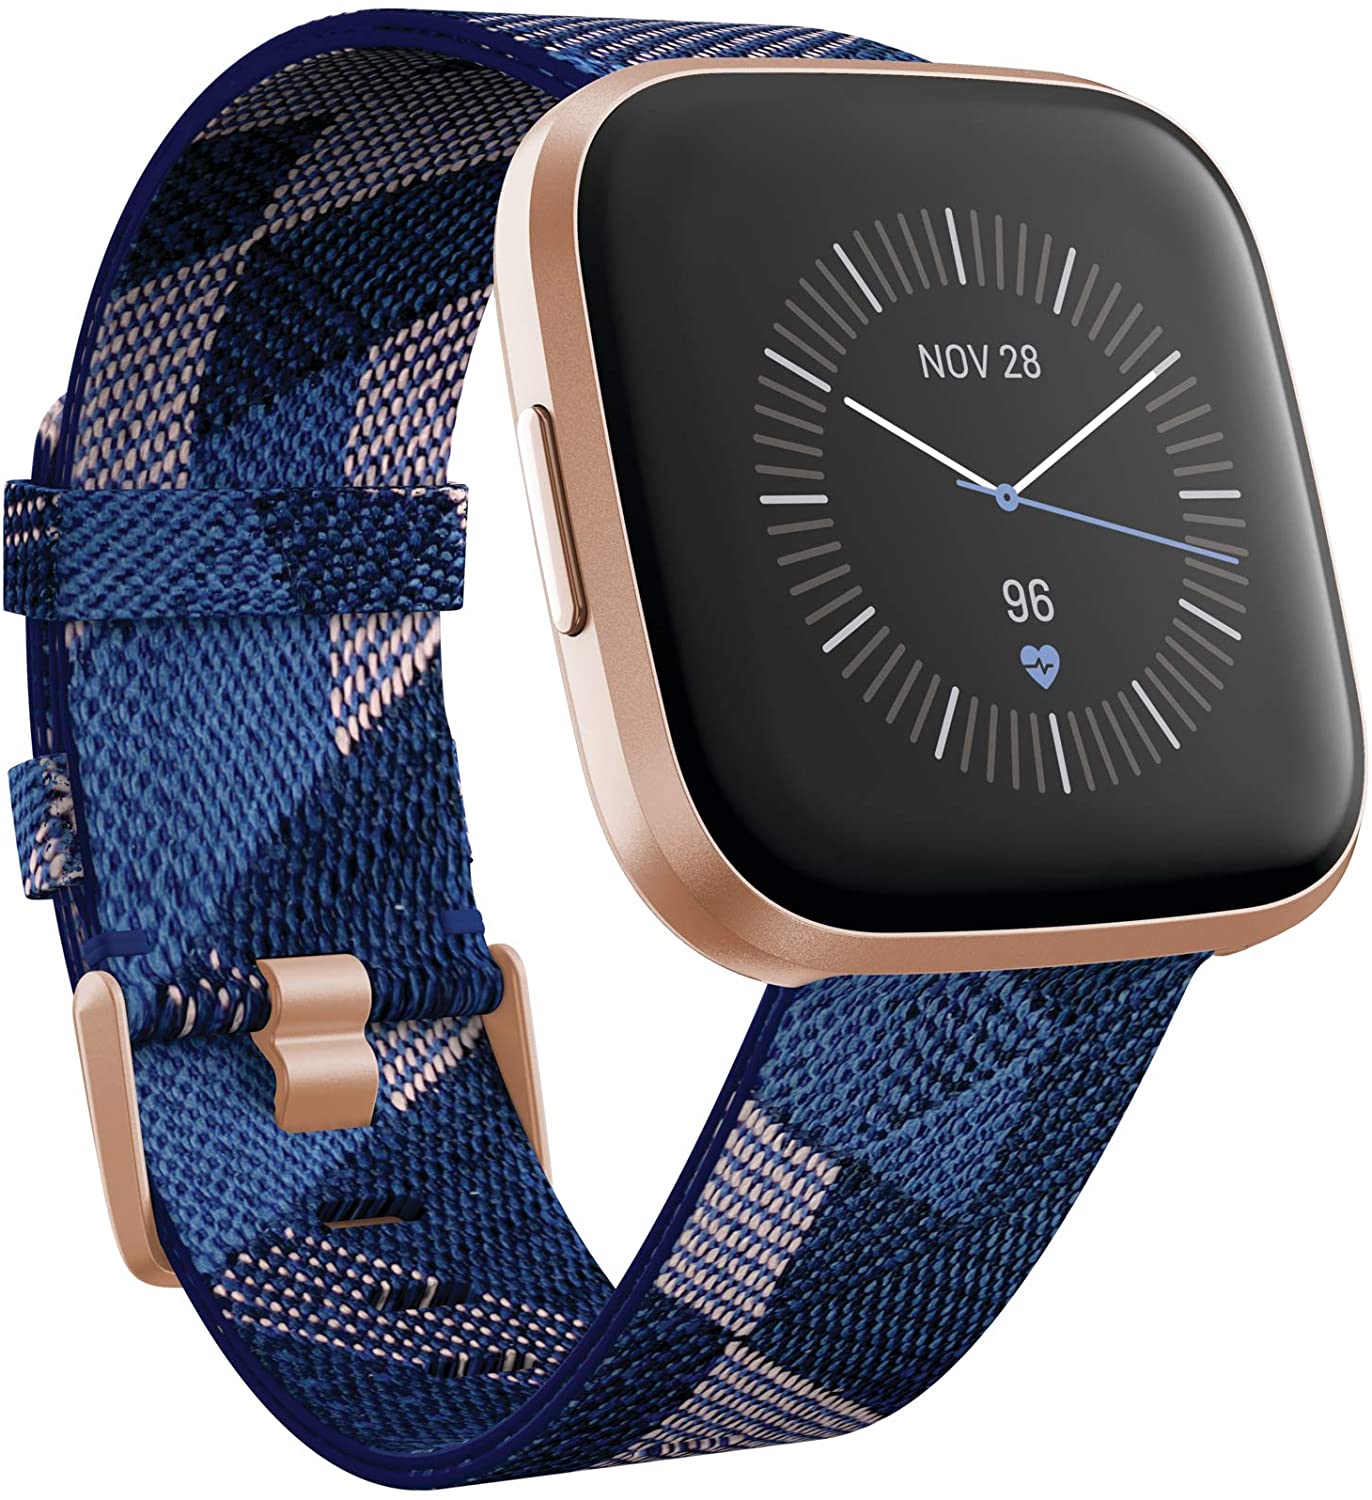 Fitbit Versa 2 Special Edition Health and Fitness Smart Watch with Heart Rate, Music, Alexa Built-In, Sleep and Swim Tracking, Navy and Pink Woven/Copper Rose, One Size (S and L Bands Included), 2.3